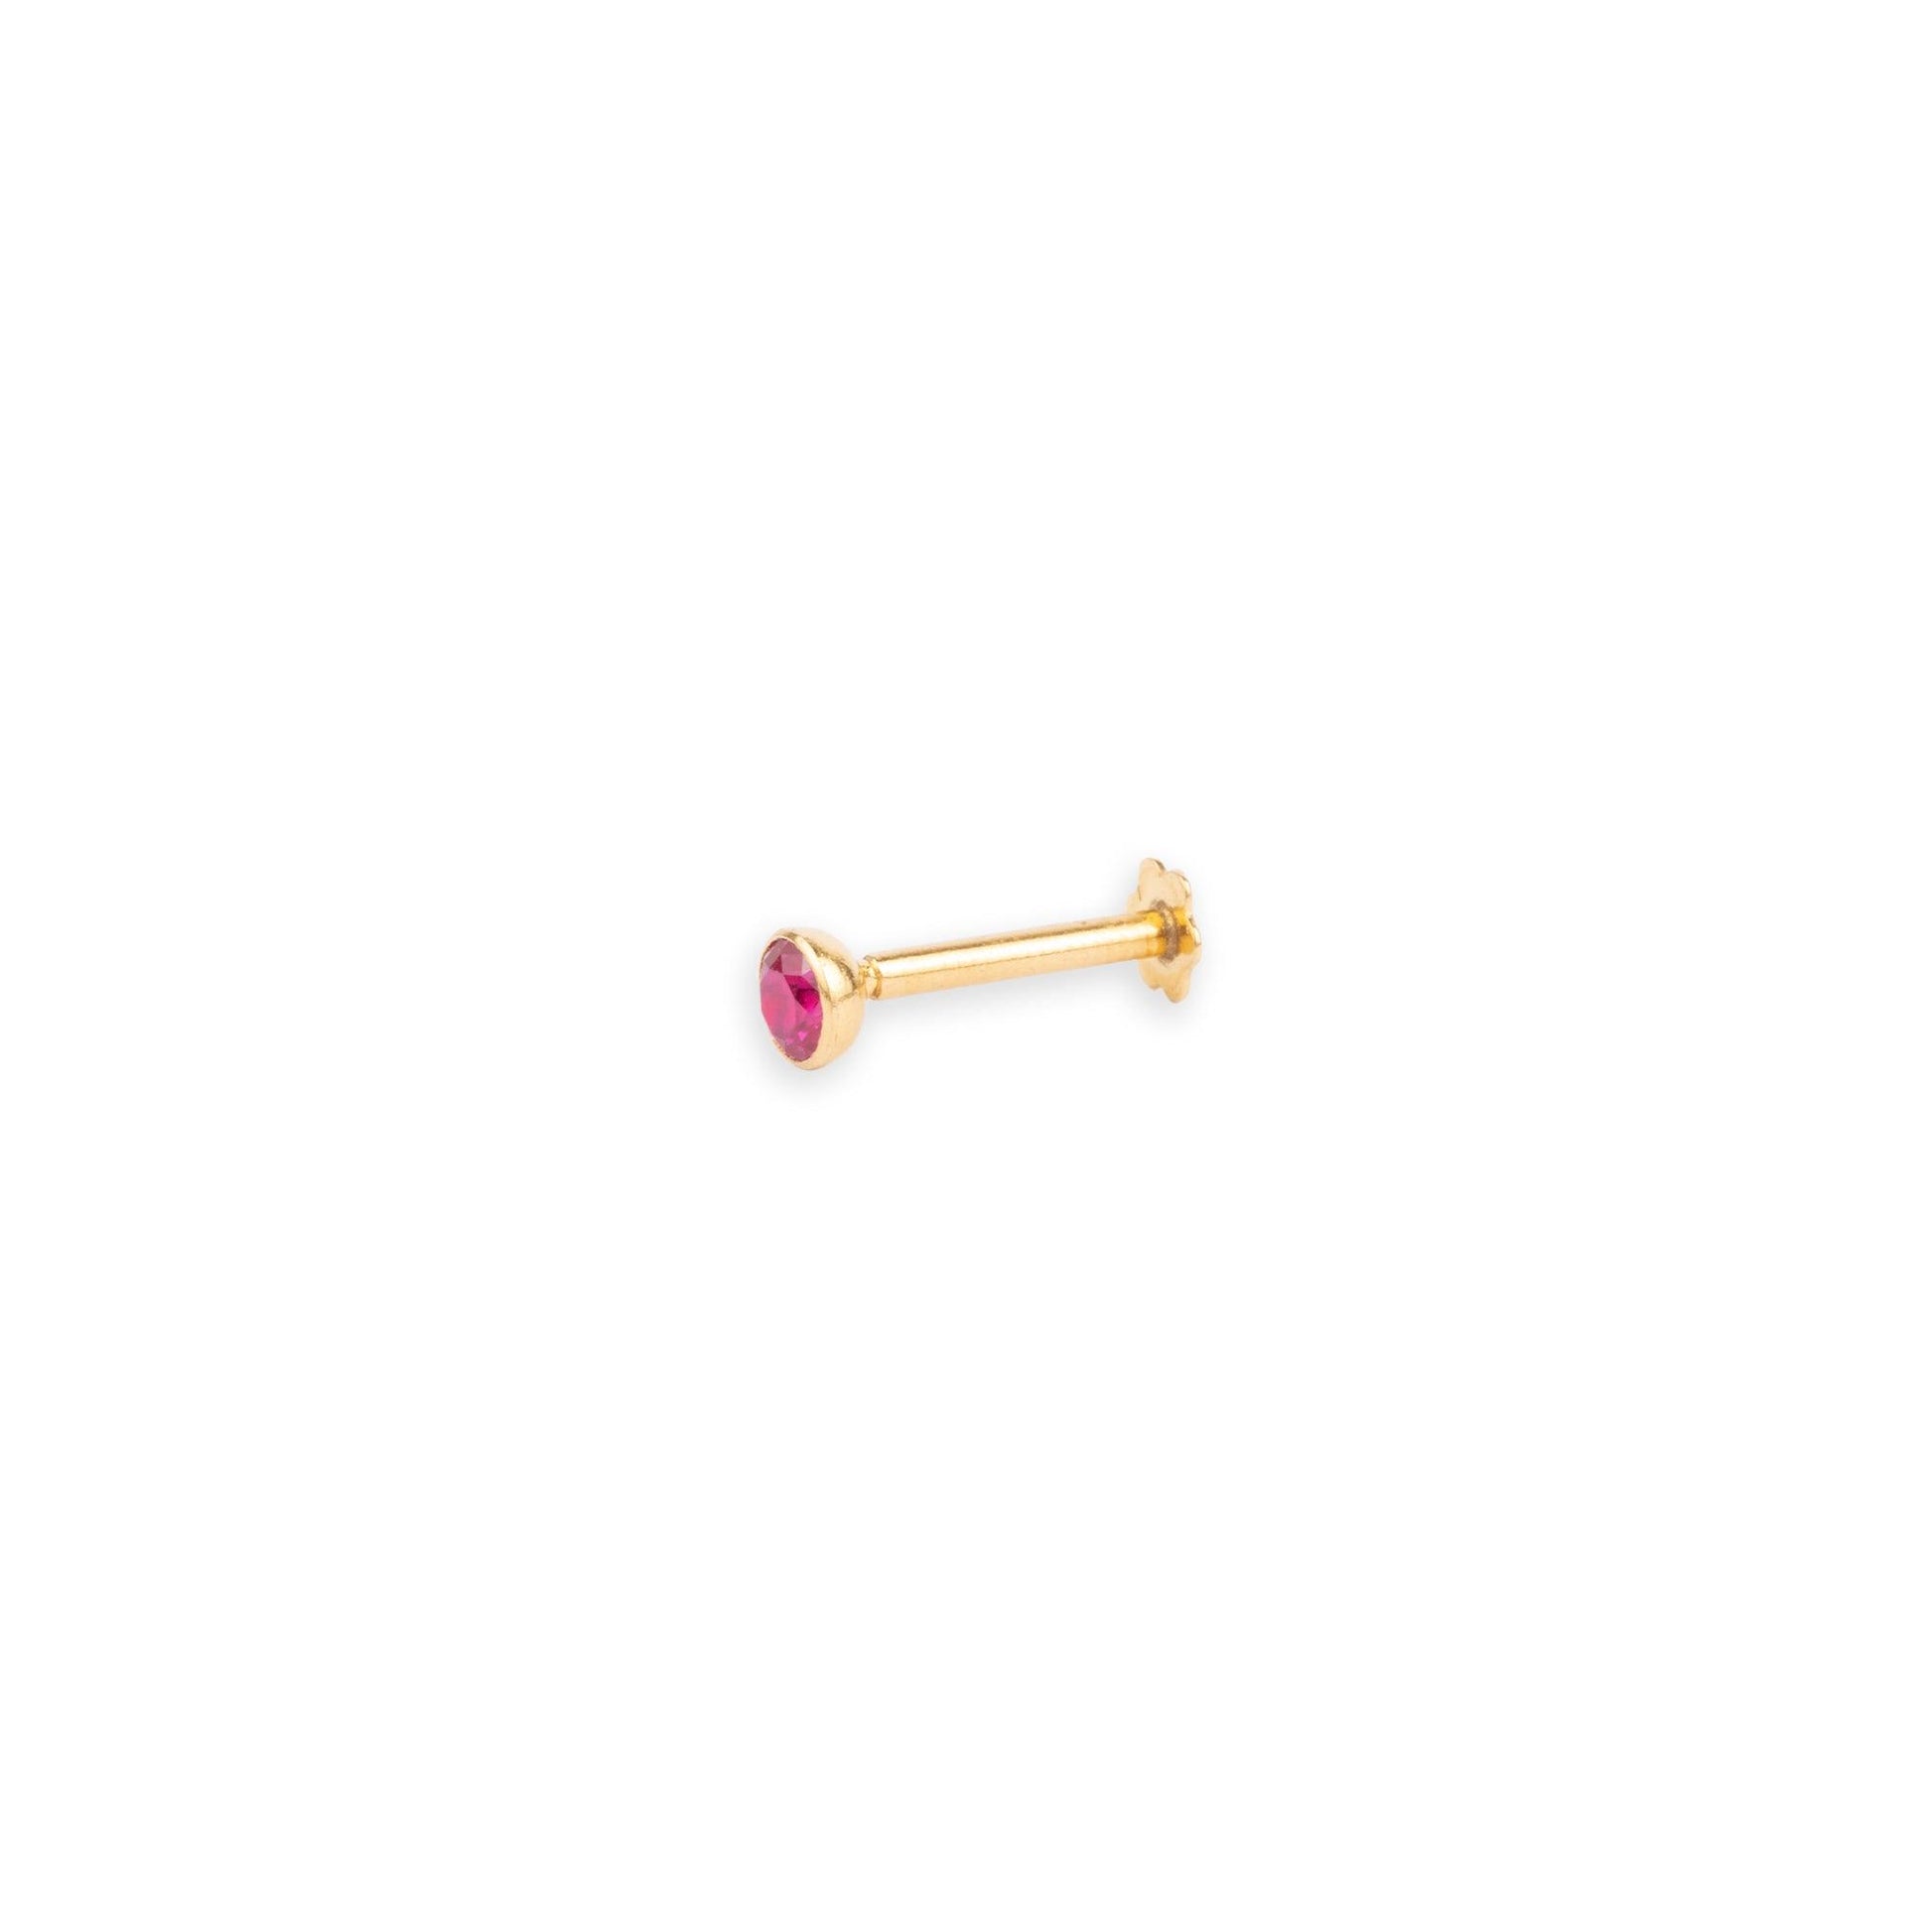 18ct Yellow Gold Screw Back Nose Stud with Cubic Zirconia in a Rub Over (Bezel) Setting NS-2880 - Minar Jewellers